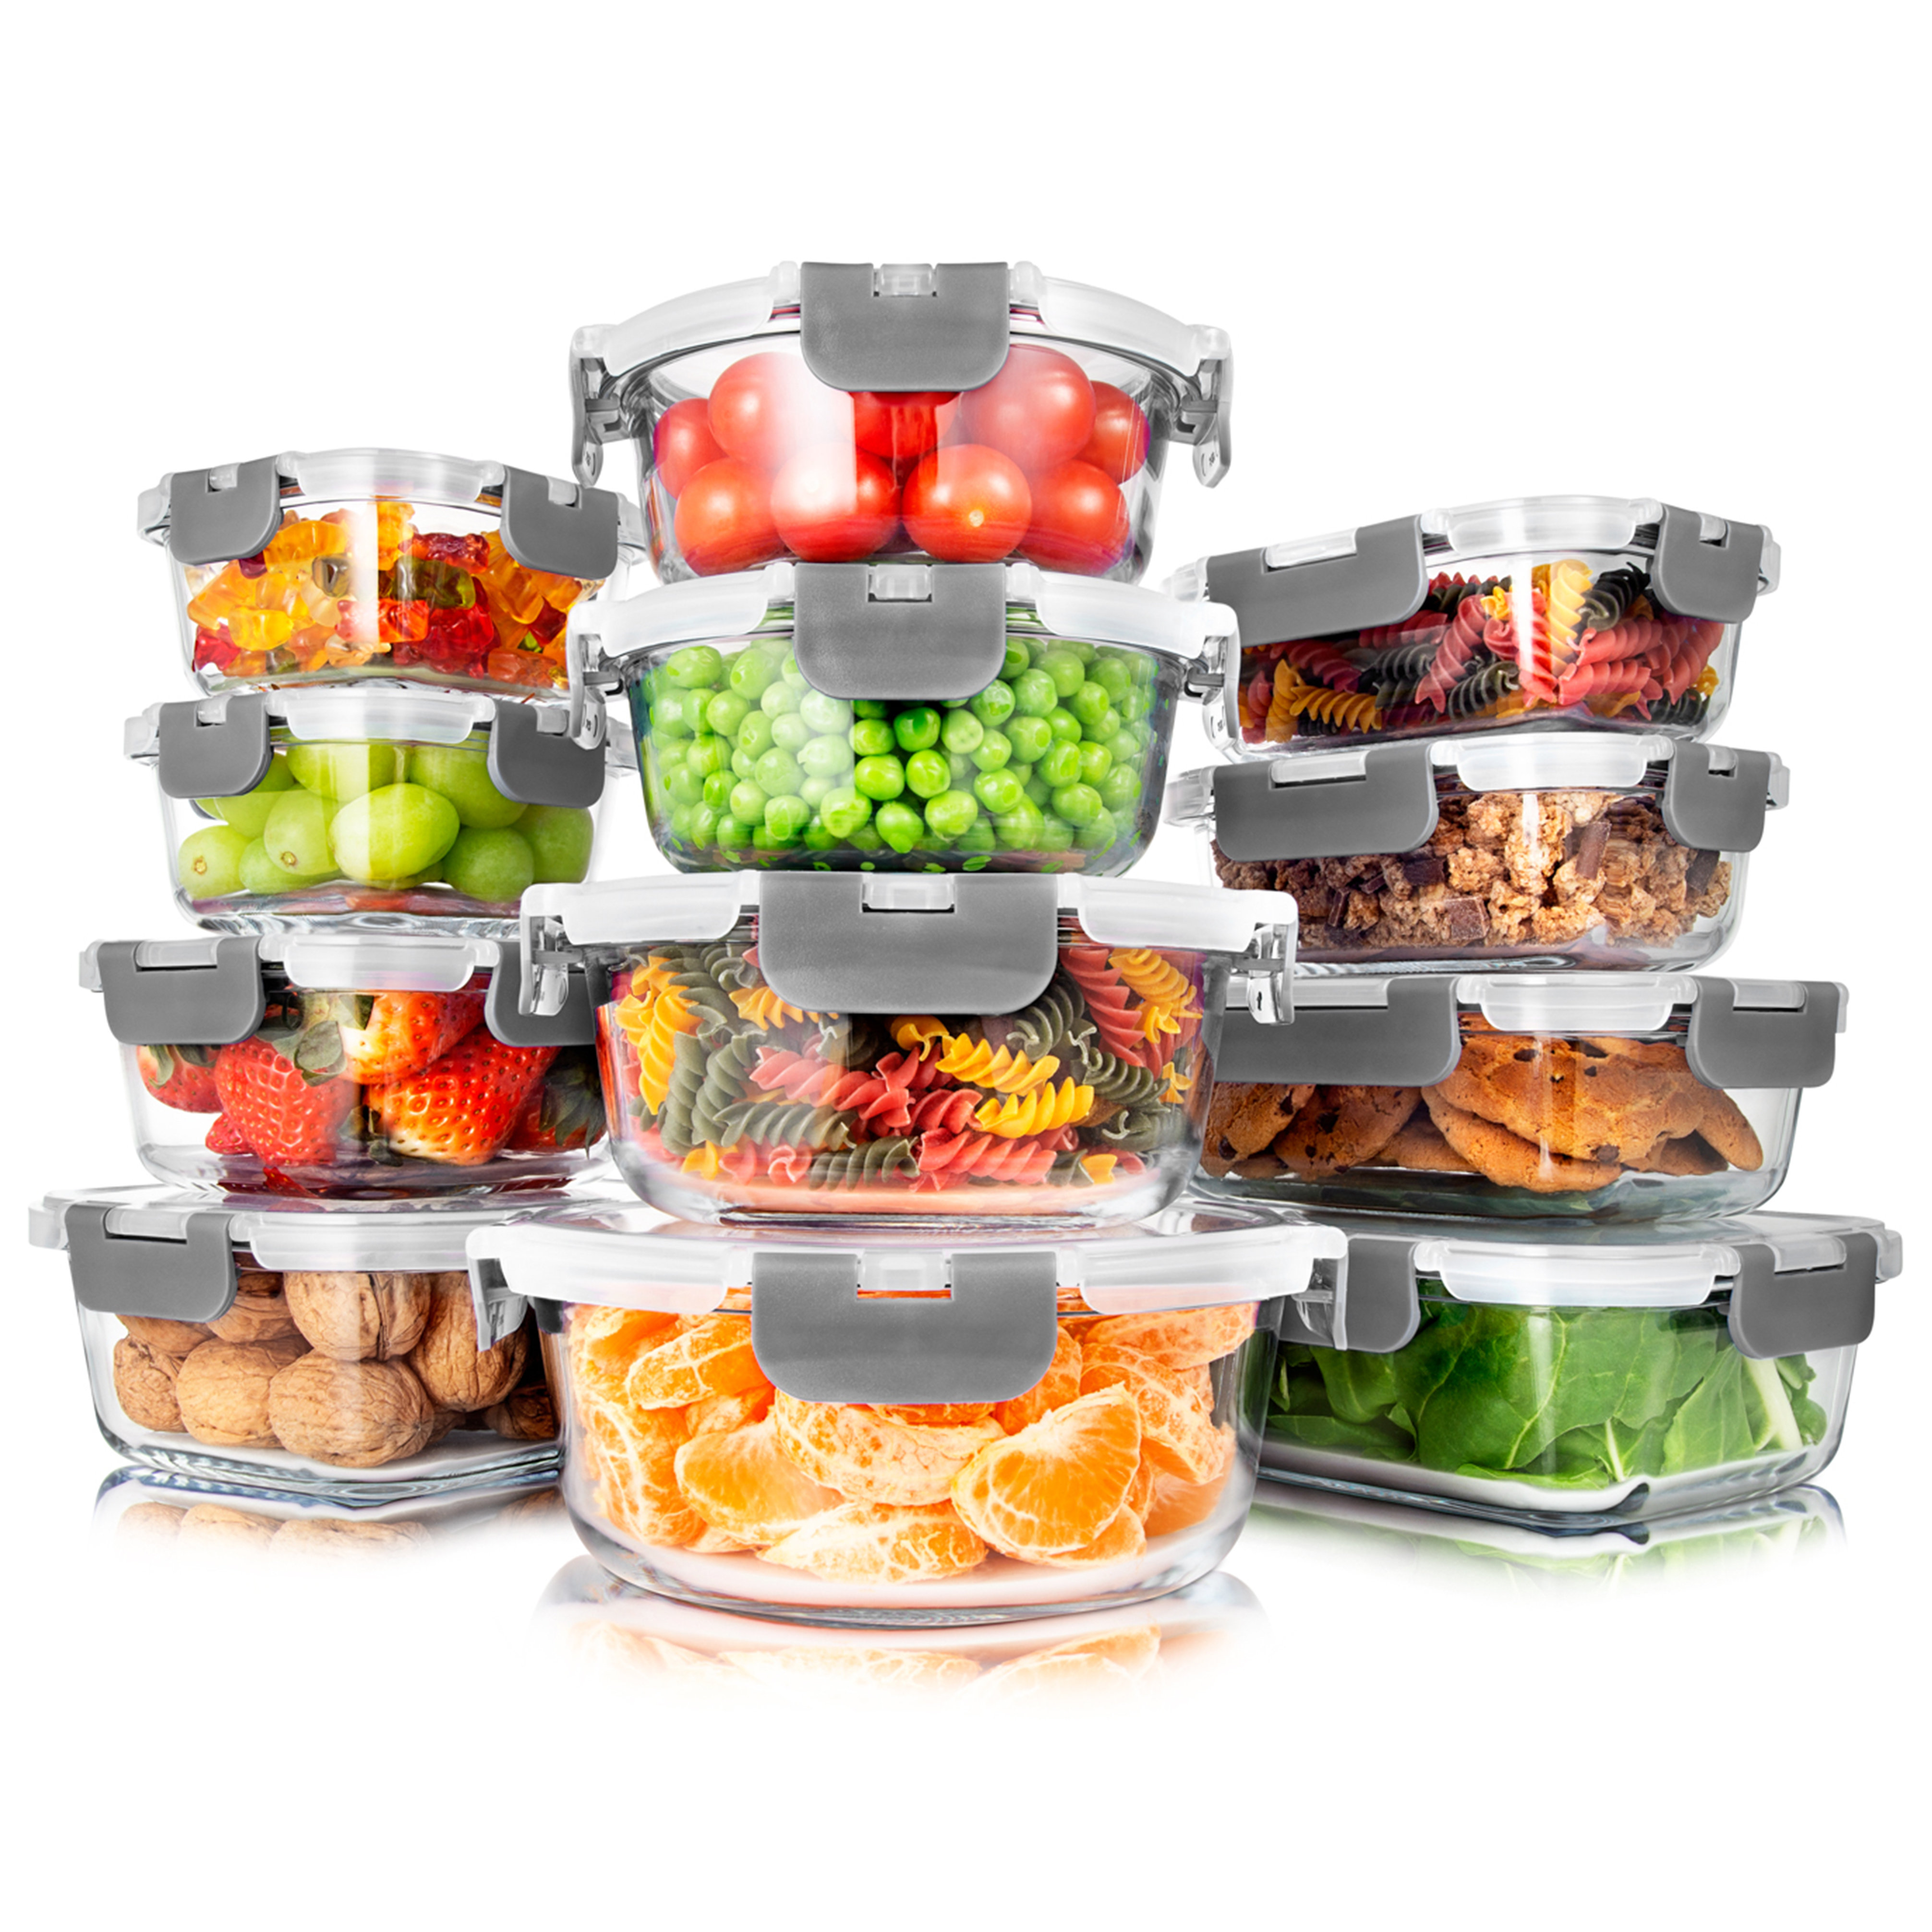 JoyJolt 24 Piece Fluted Glass Food Storage Containers with Leakproof Lids Set - Gray